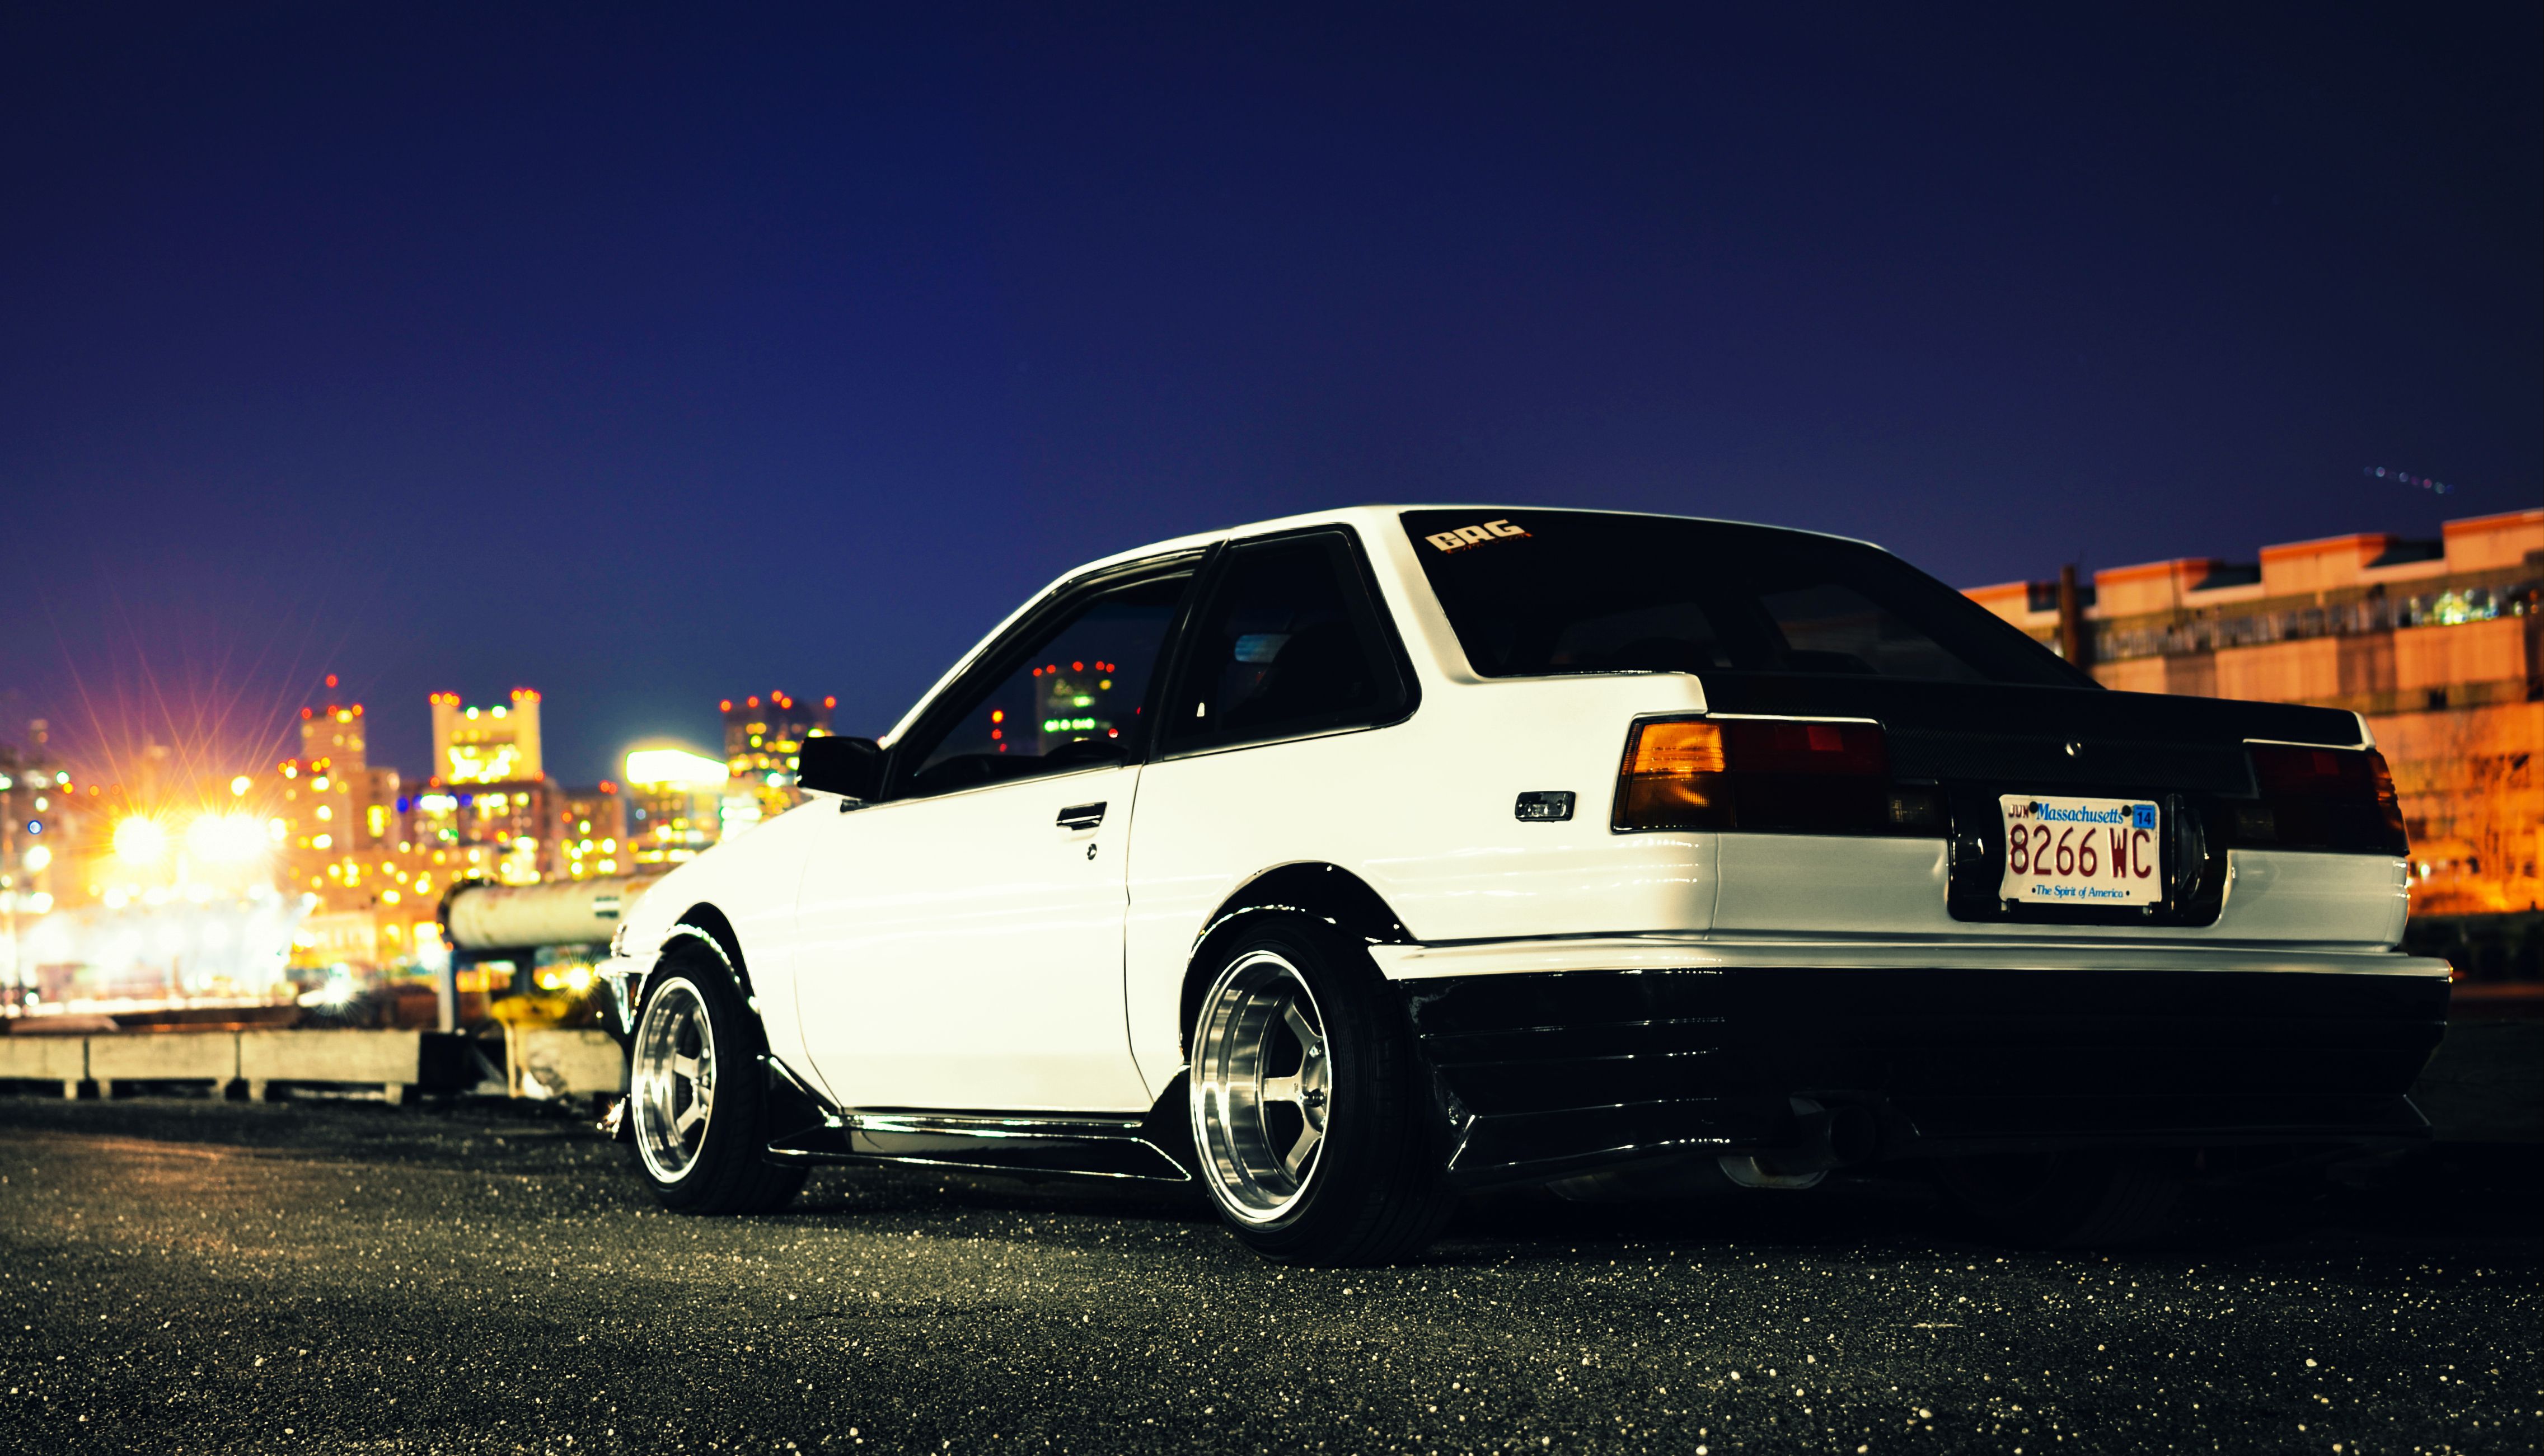 White car on the road at night - Toyota AE86